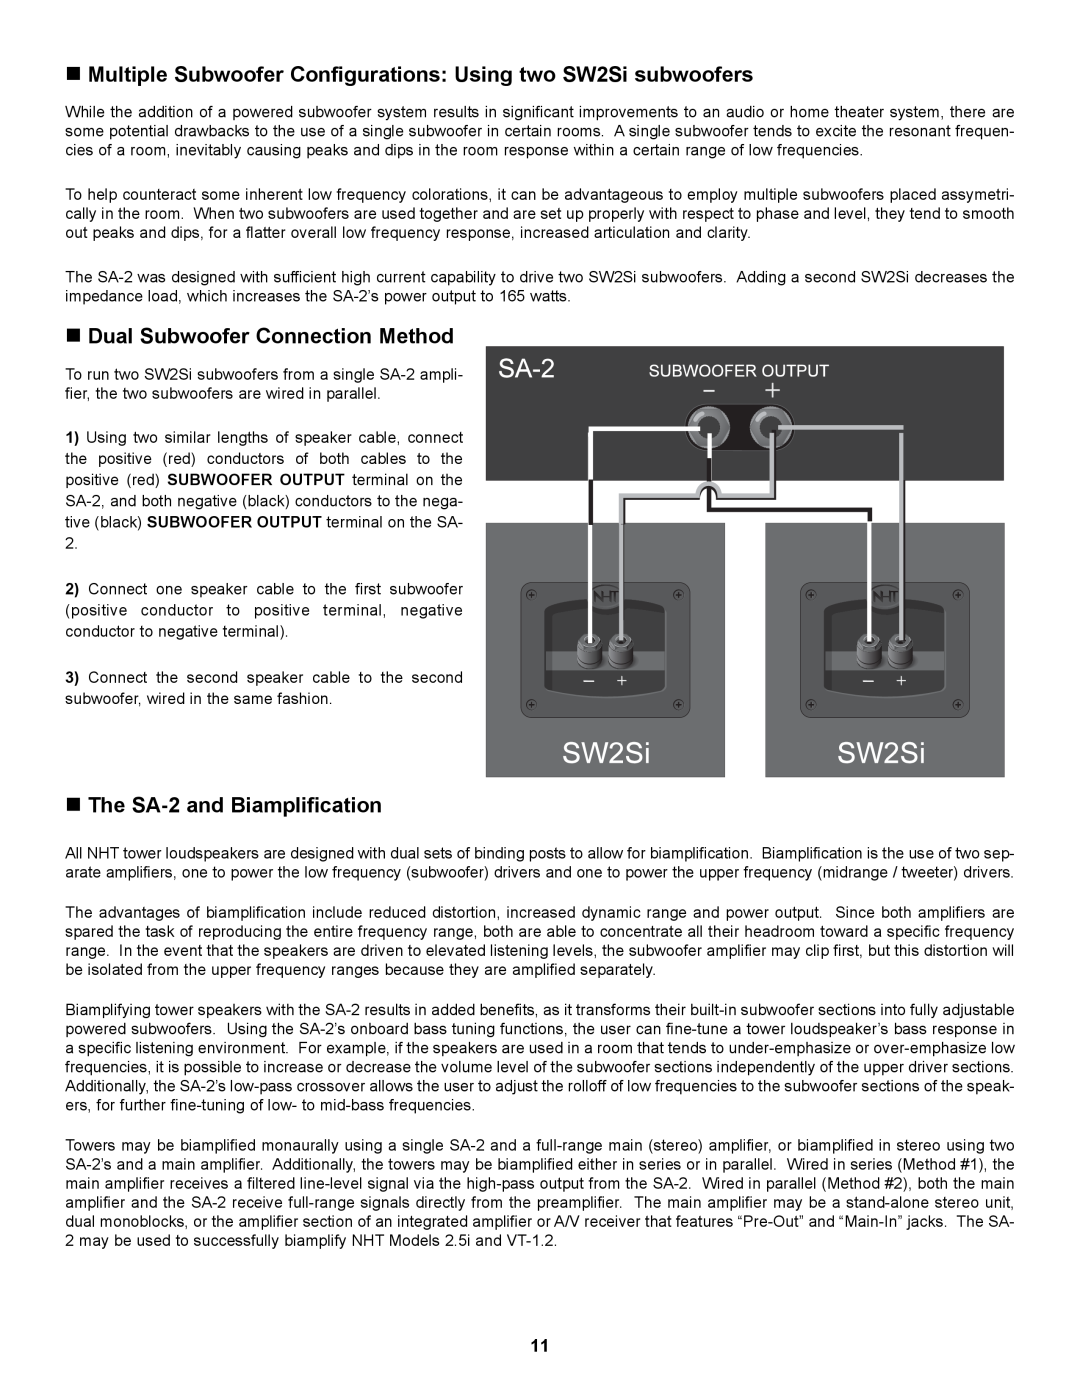 NHT owner manual „Dual Subwoofer Connection Method, „The SA-2and Biamplification 